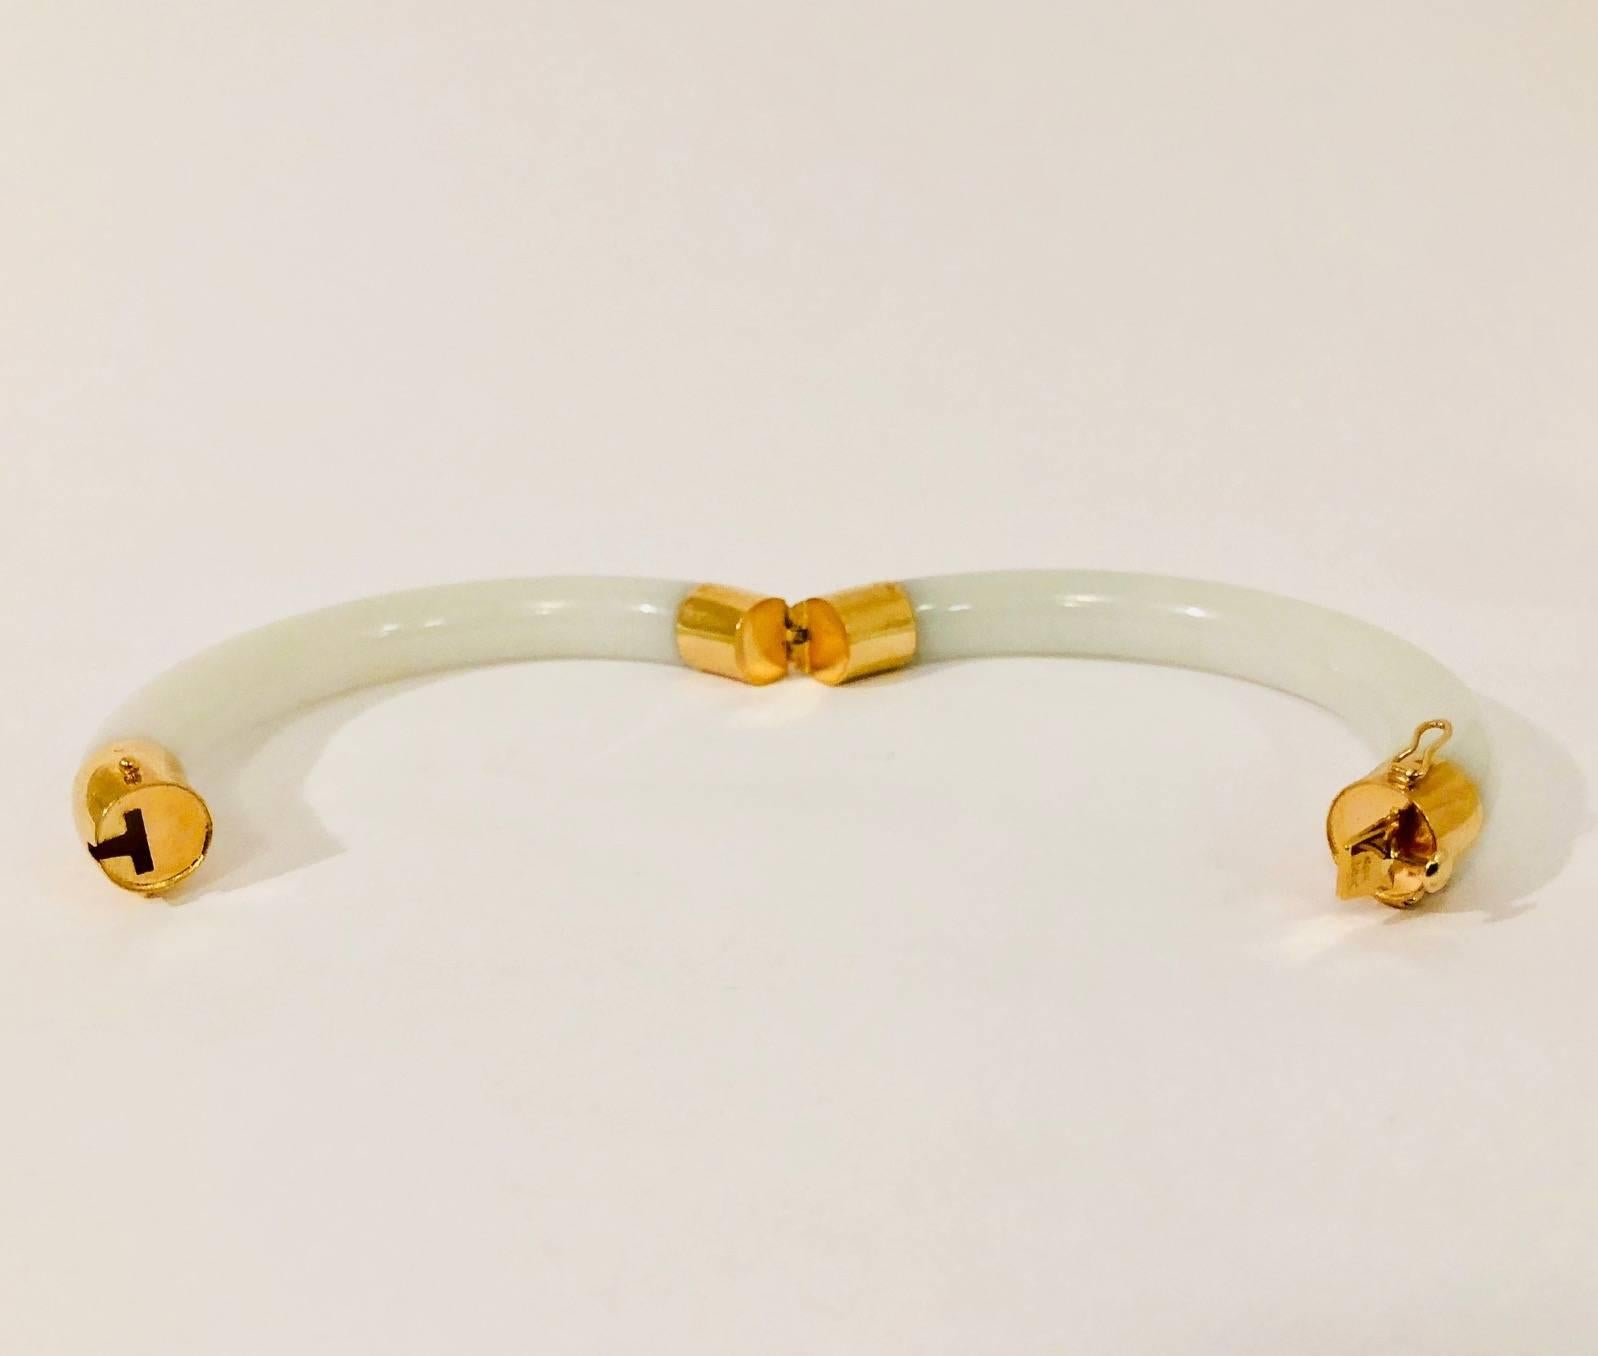 An absolutely classic white jade bangle with 14 karat yellow gold end caps.  One end cap opens for total ease of use.  Secured on each side with a figure 8 safety clasp.  The jade is perfectly smooth and luxurious to touch. Sophisticated addition to